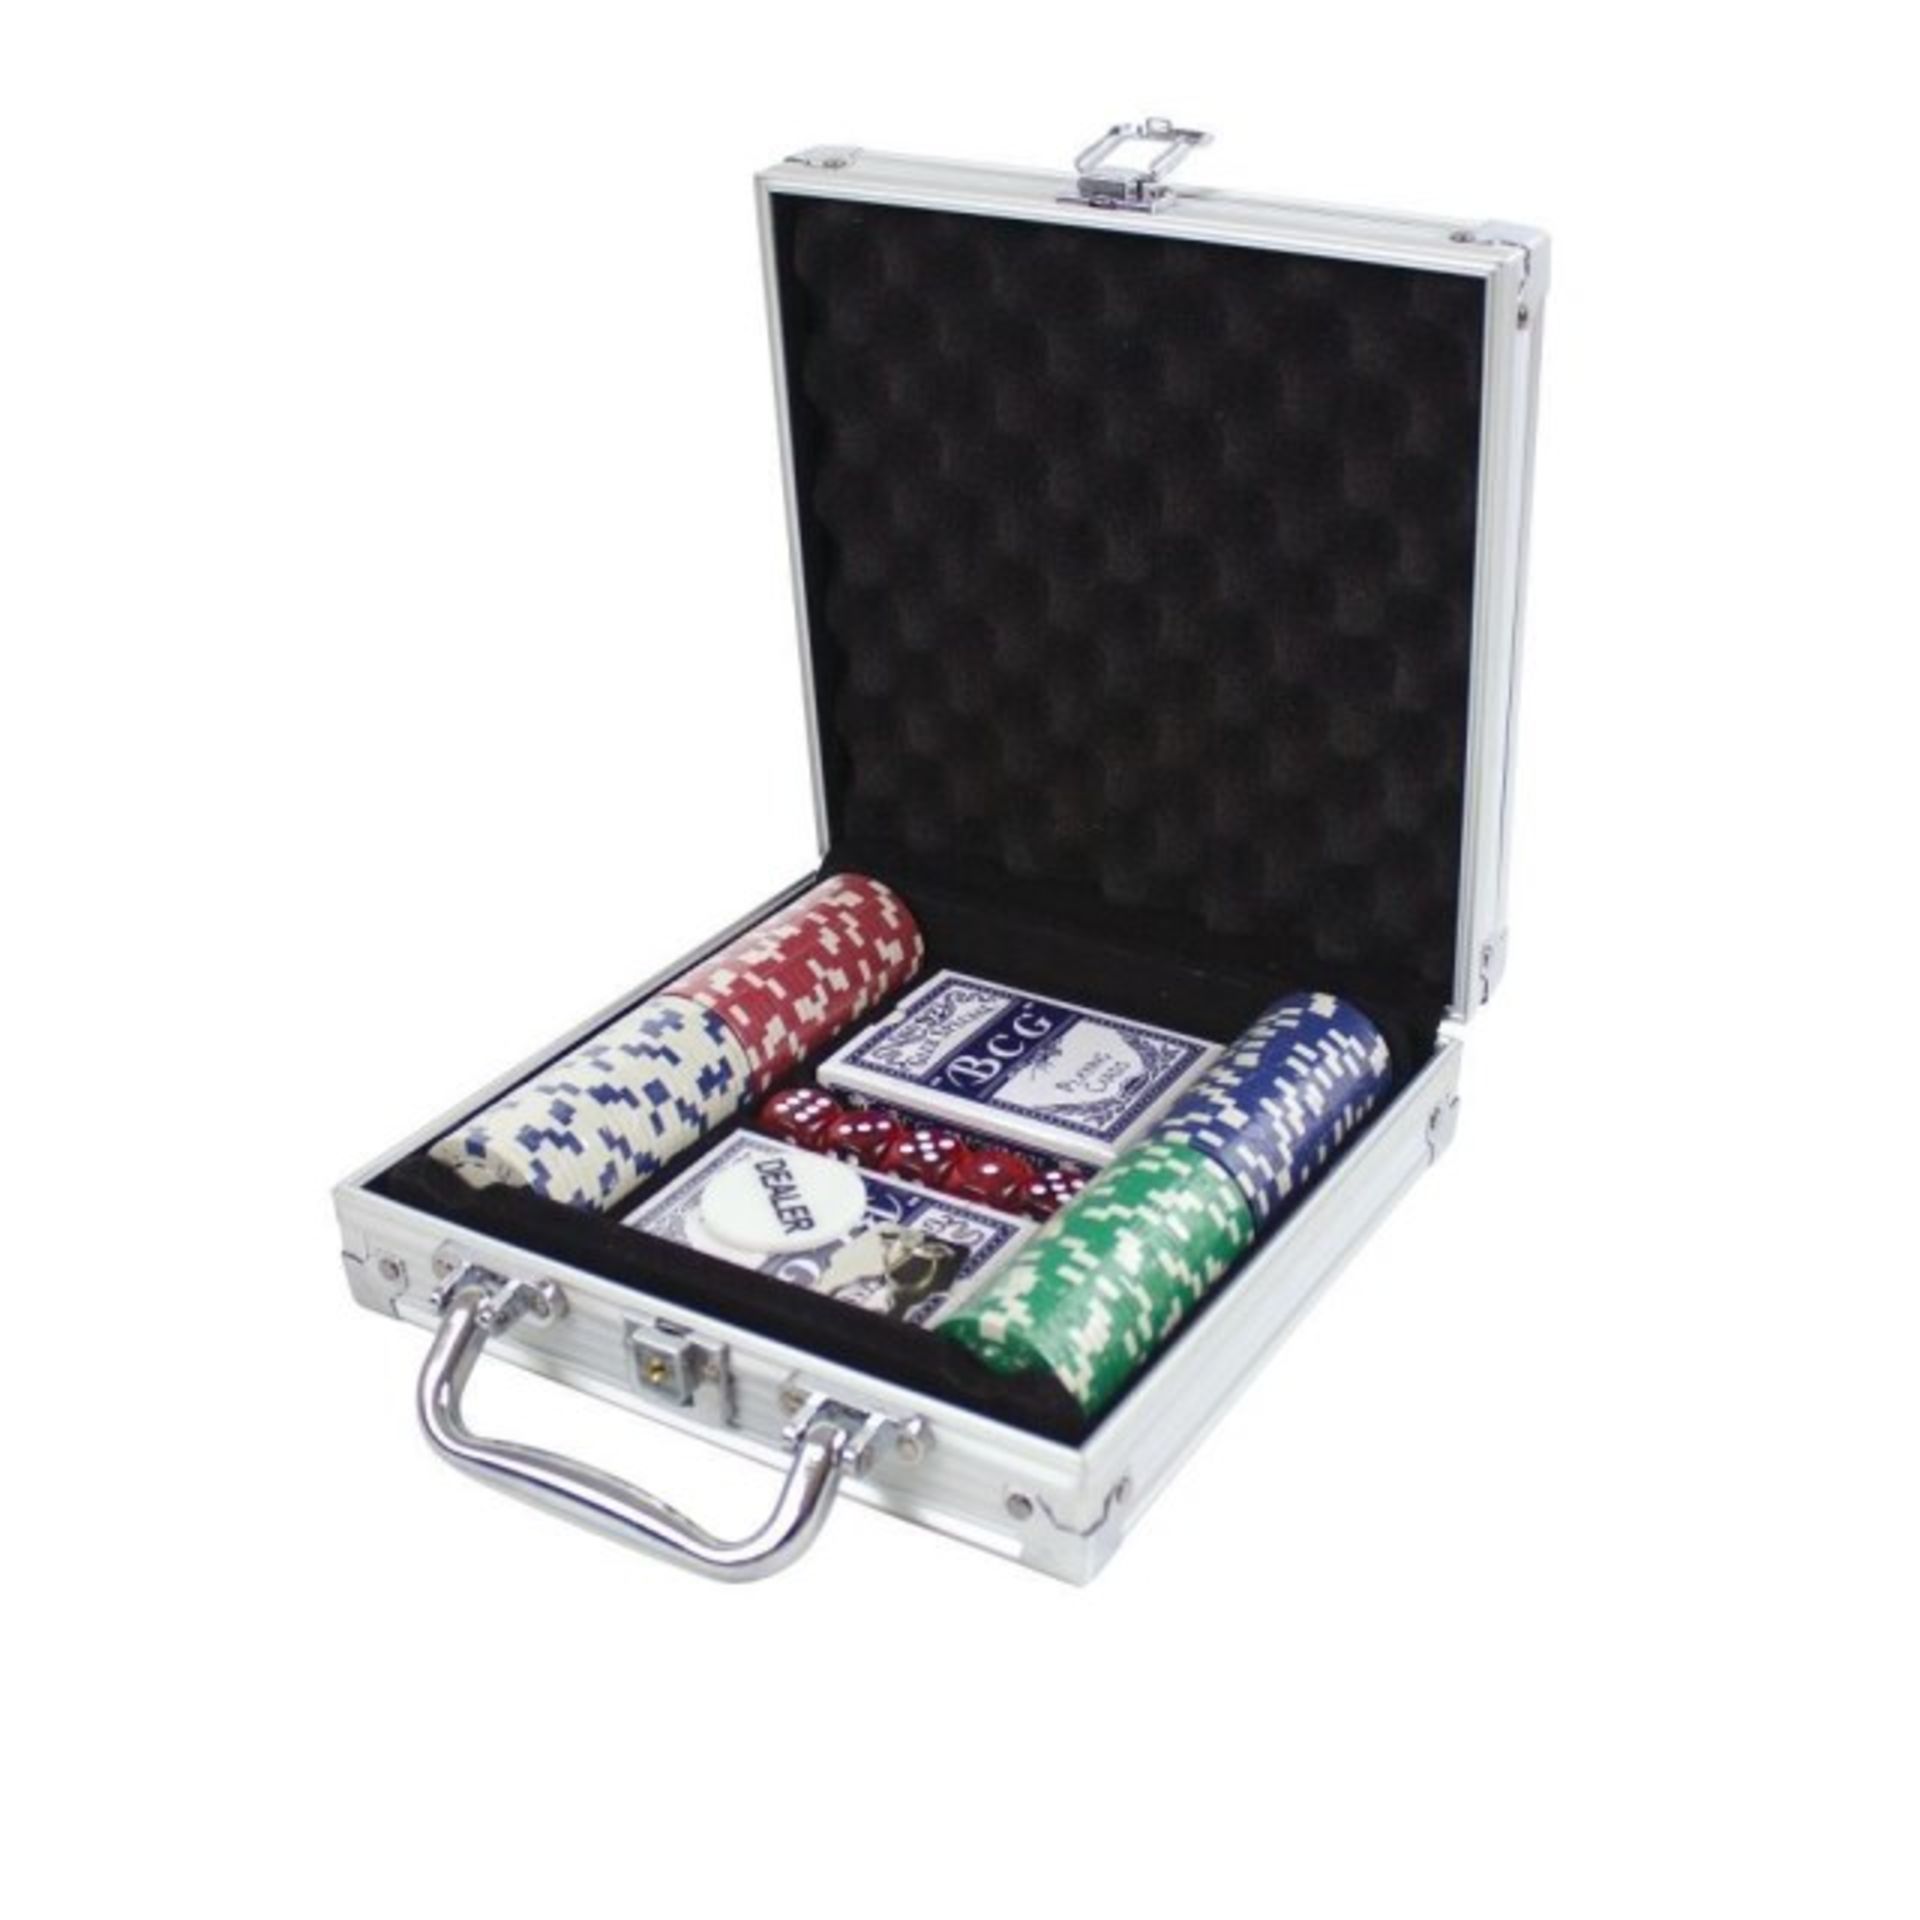 V Brand New 100 Piece Casino Style Poker Set In Carry Case X 2 YOUR BID PRICE TO BE MULTIPLIED BY